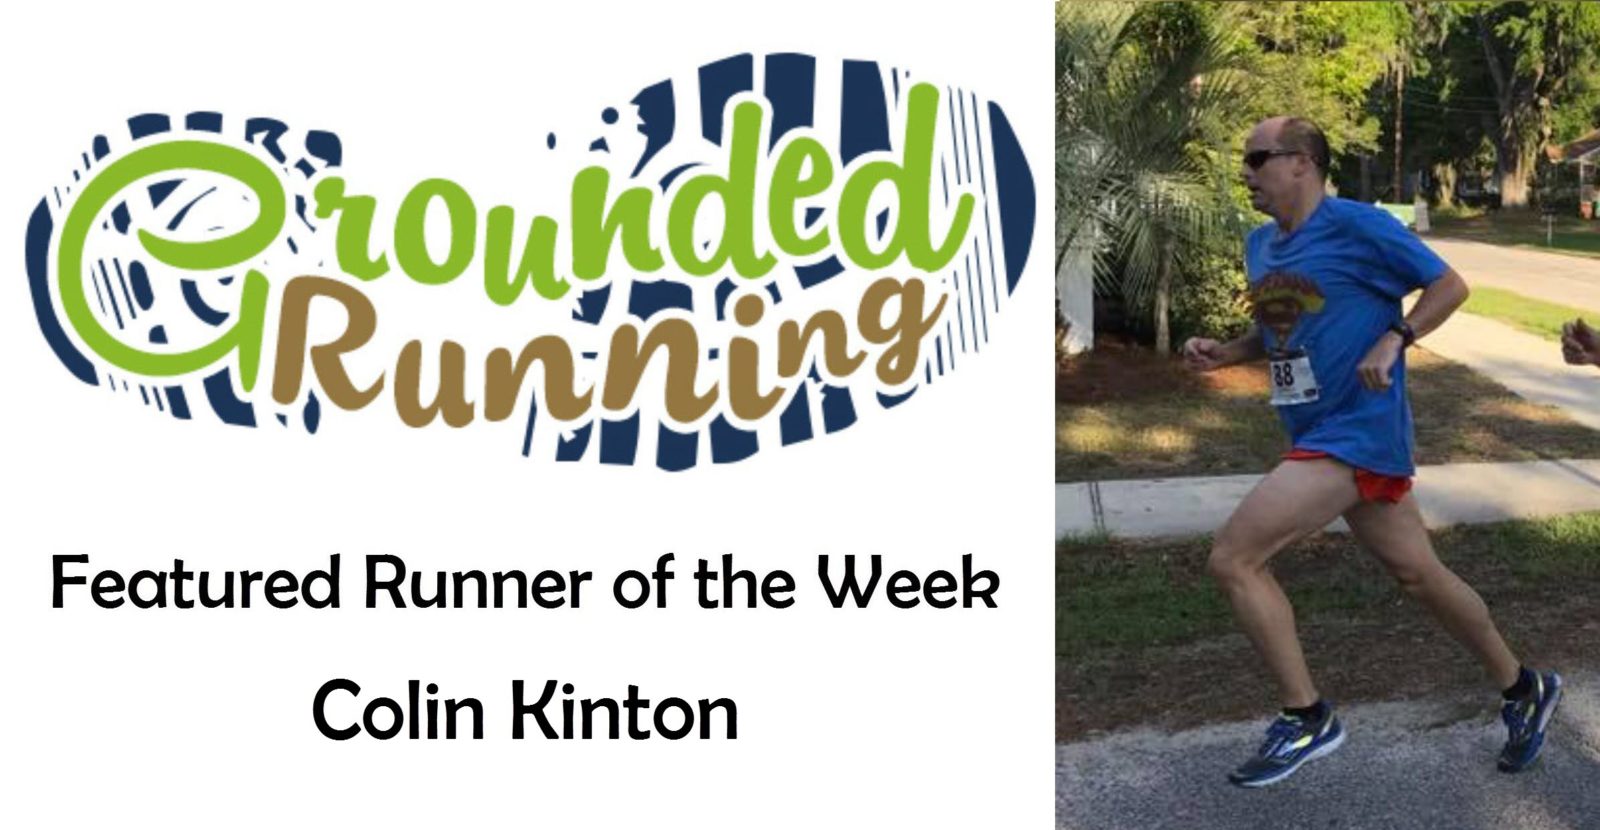 Colin Kinton - Featured Runner of the Week